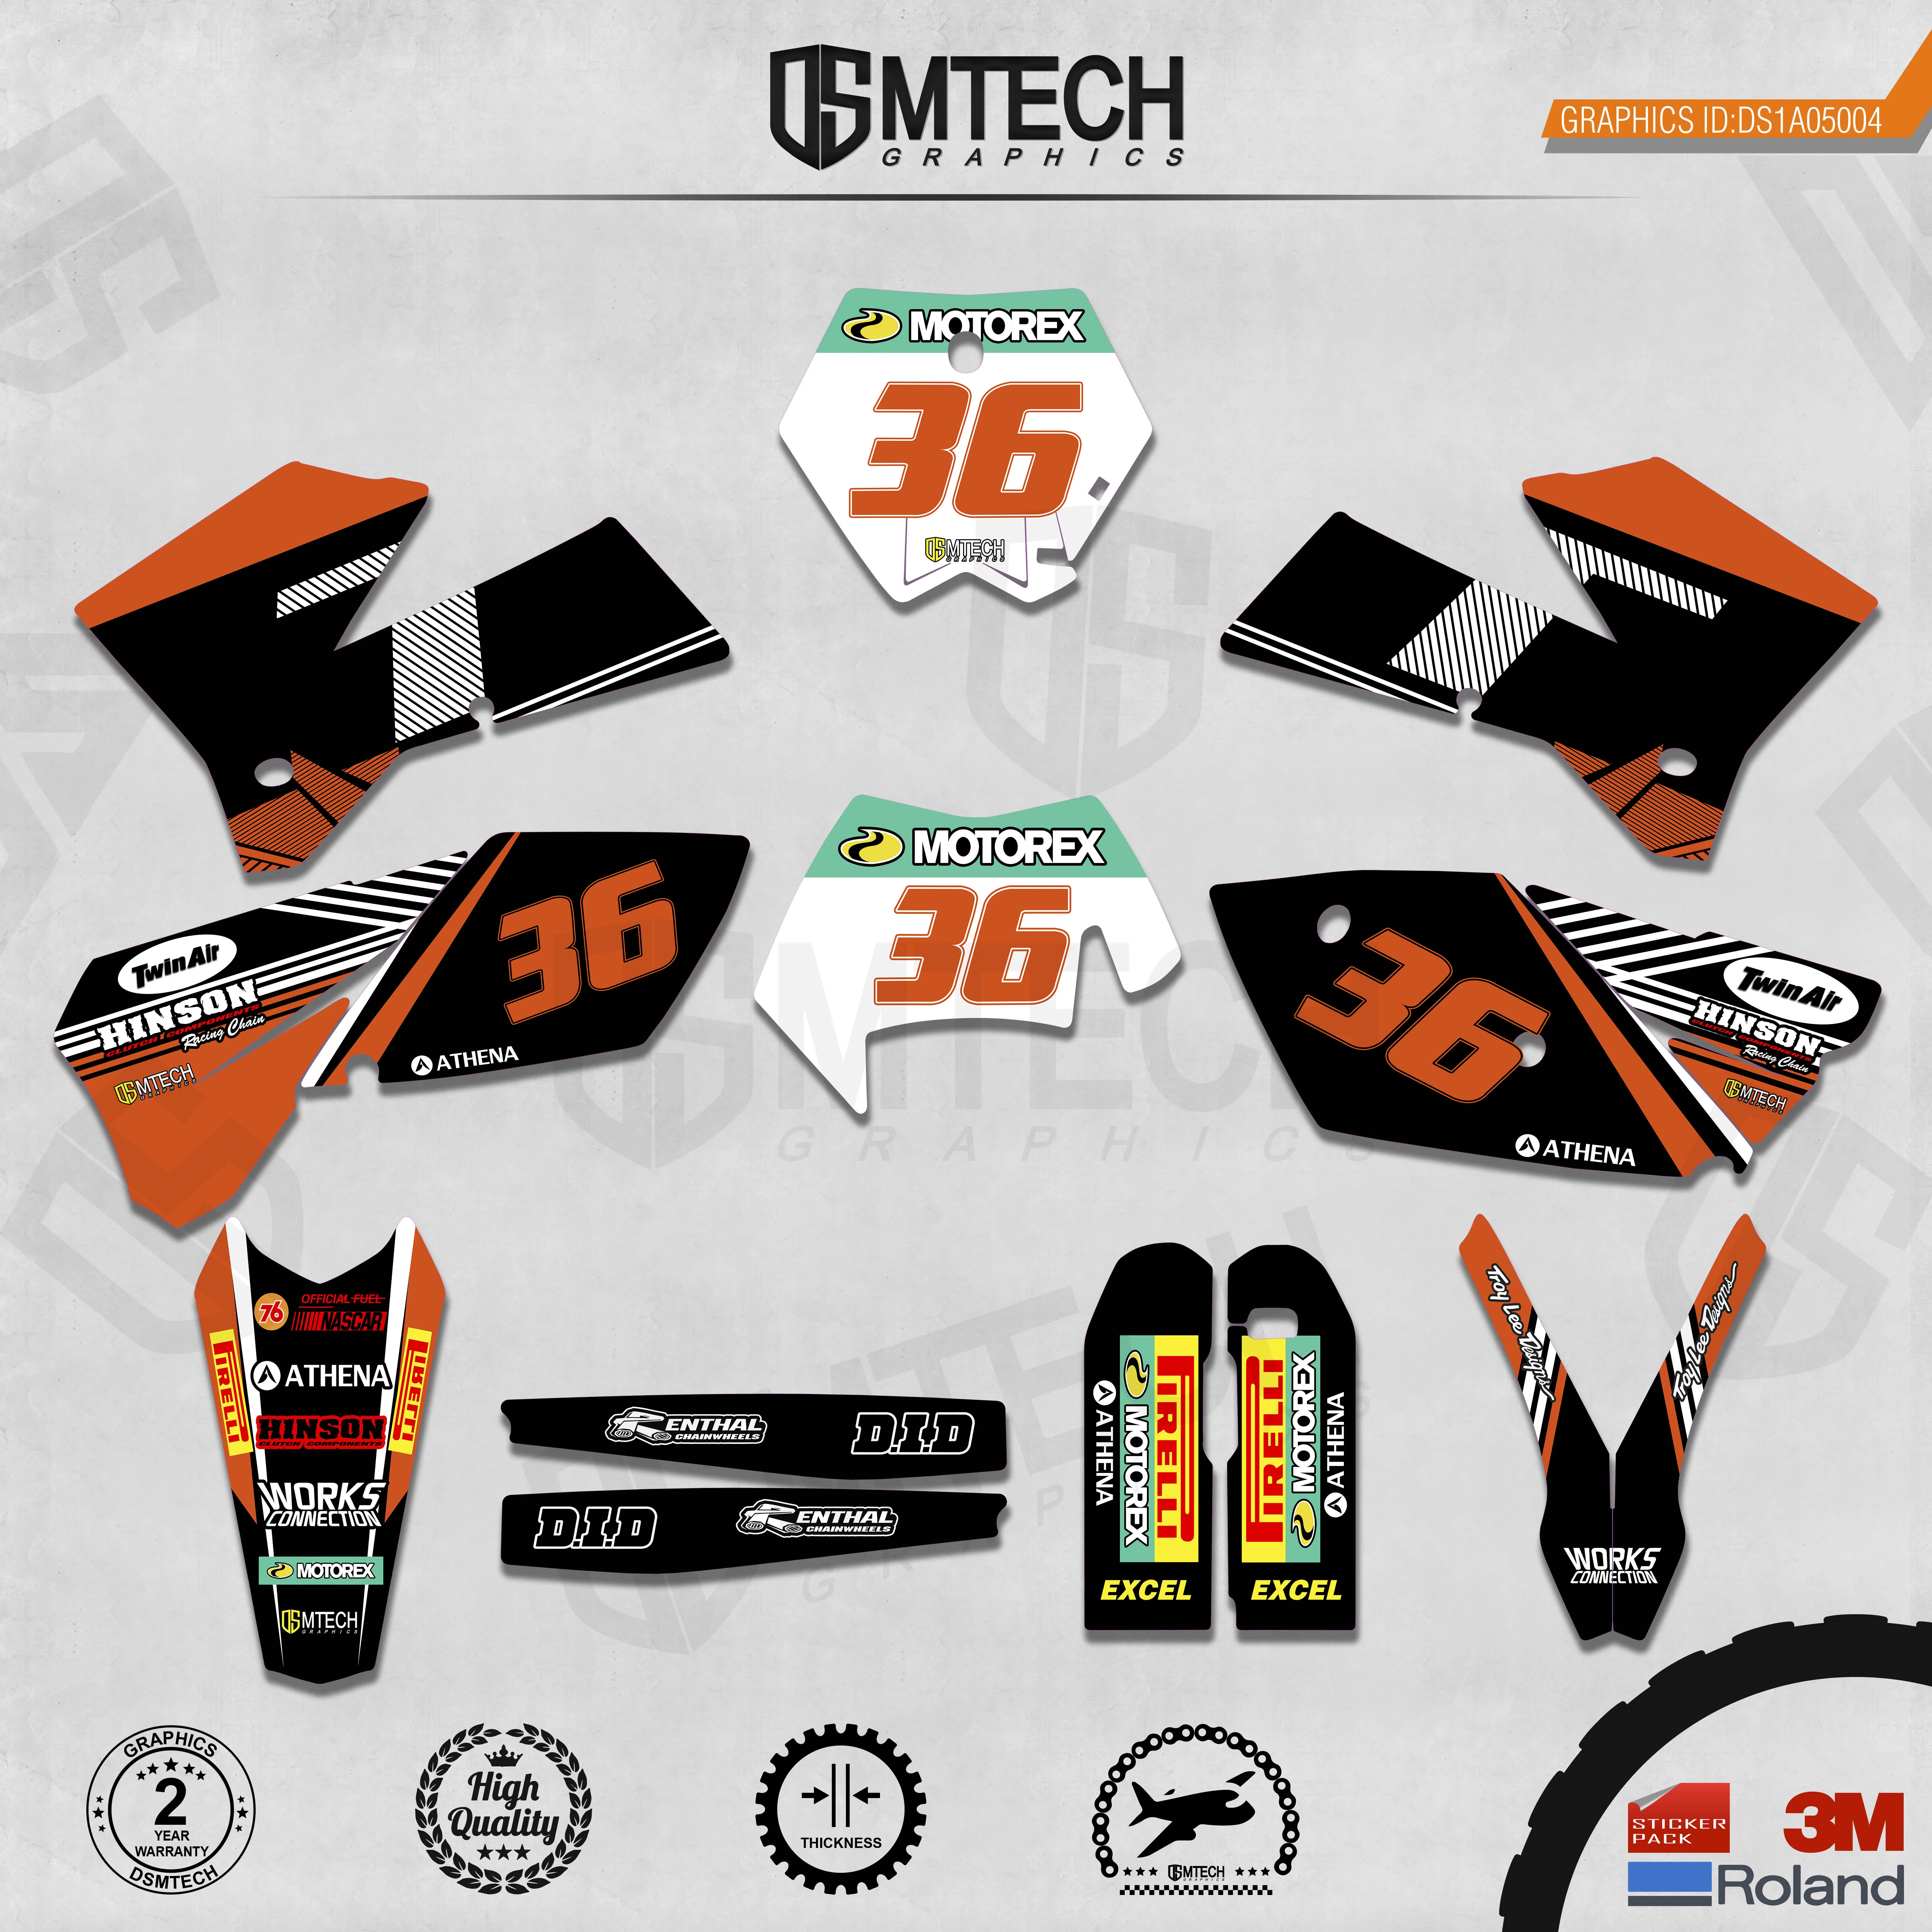 DSMTECH Customized Team Graphics Backgrounds Decals 3M Custom Stickers For 05-06SXF 06-07XCF 05-07EXC 06-07XCW  004